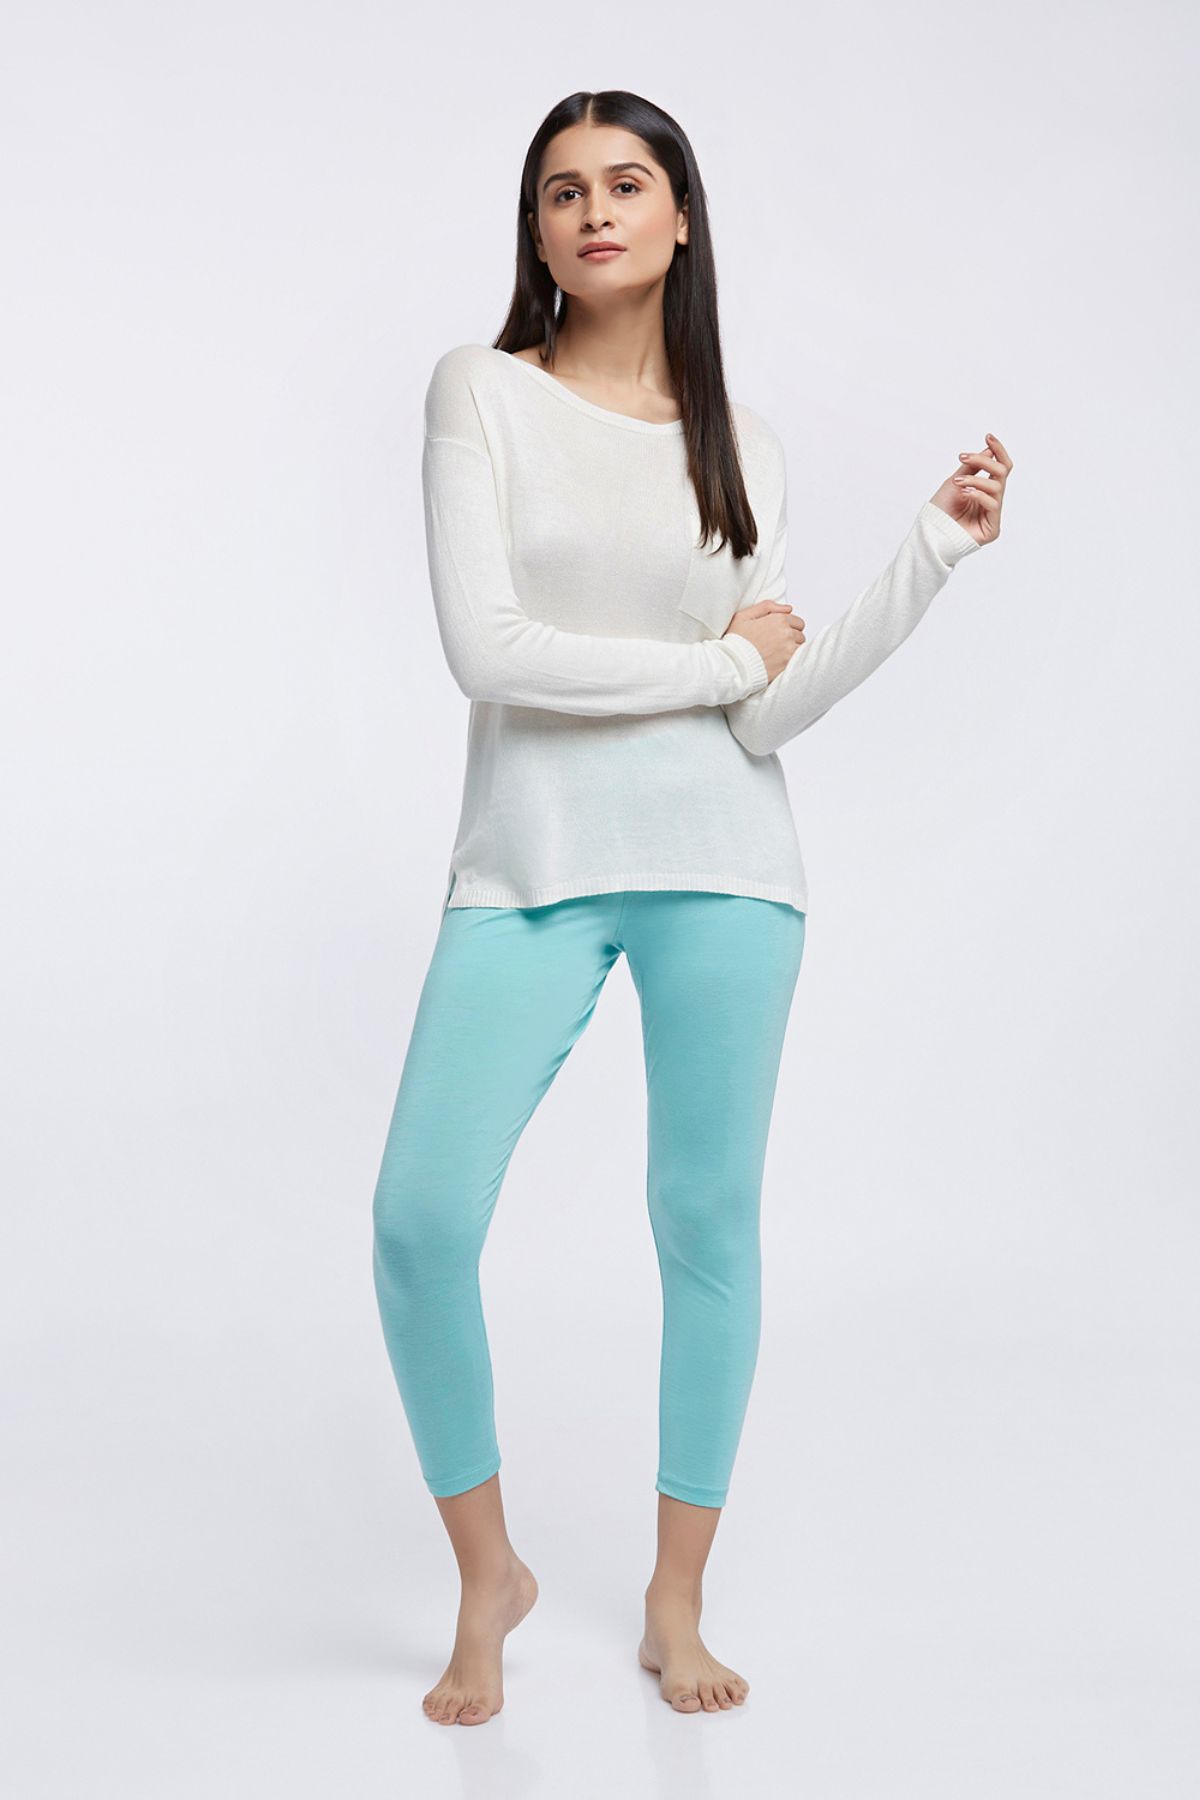 Warm Essentials By Cuddl Duds Women's Active Thermal Leggings - Black :  Target-cacanhphuclong.com.vn